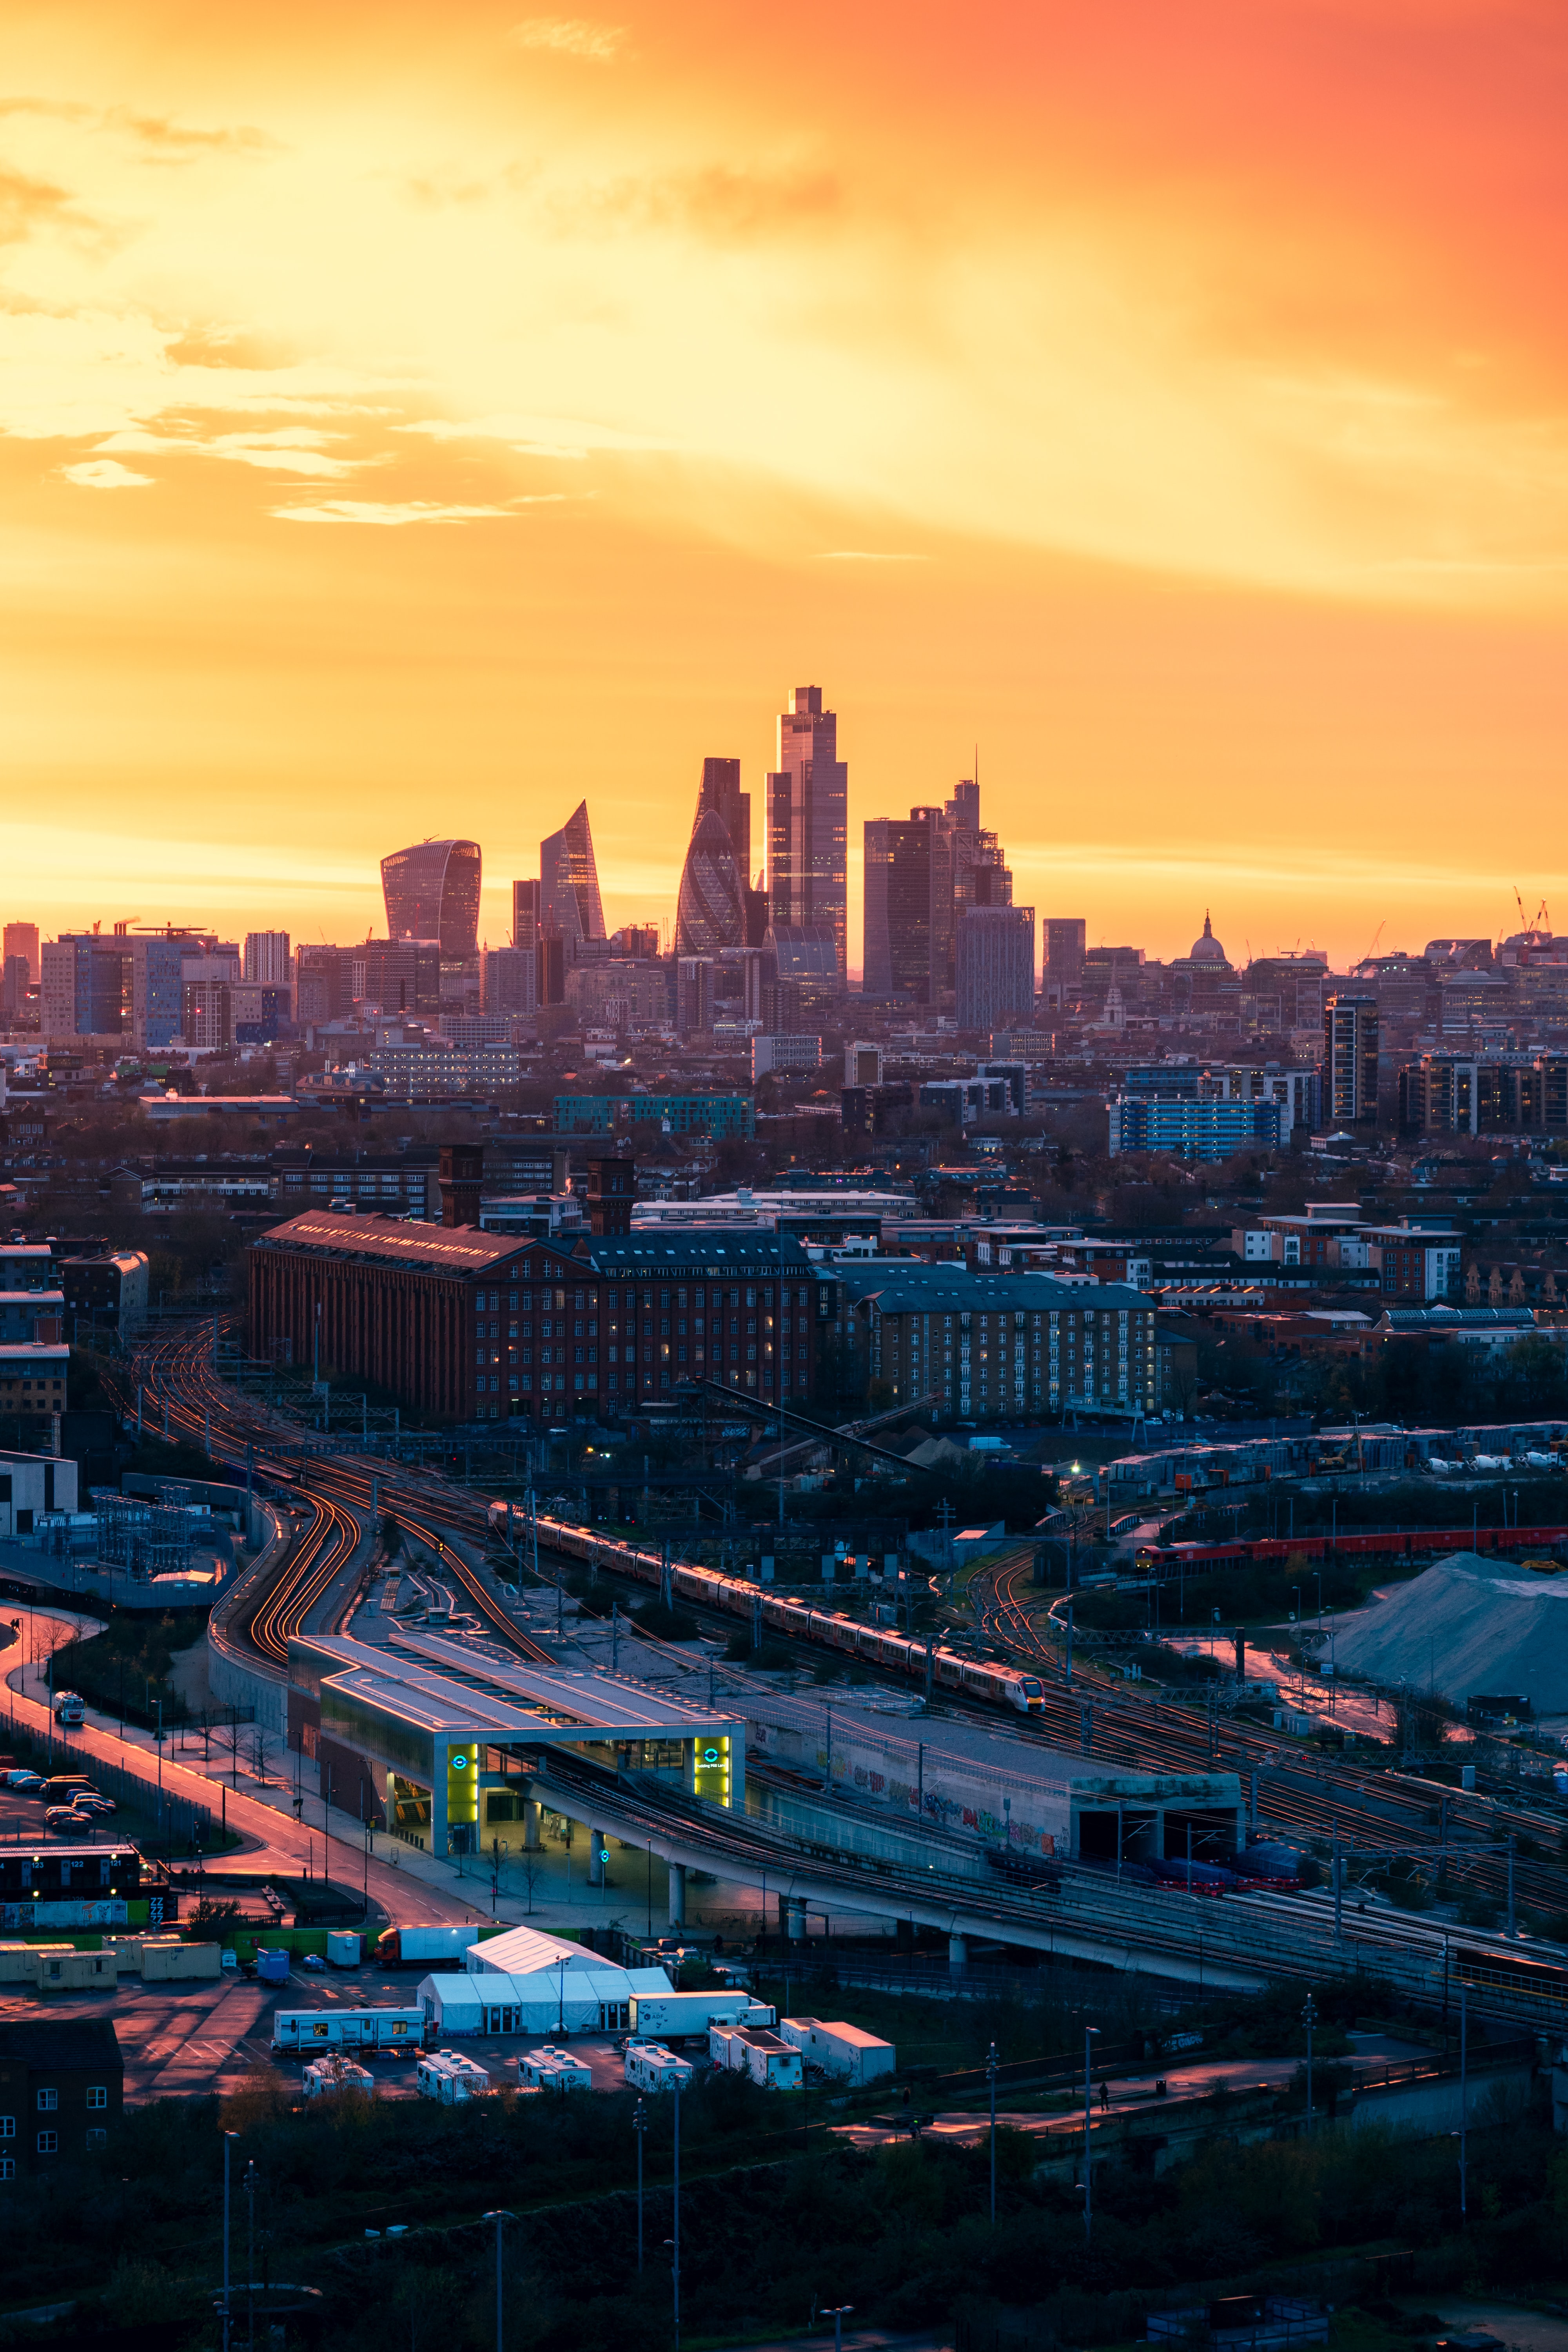 Full HD Wallpaper cities, sunset, architecture, city, building, view from above